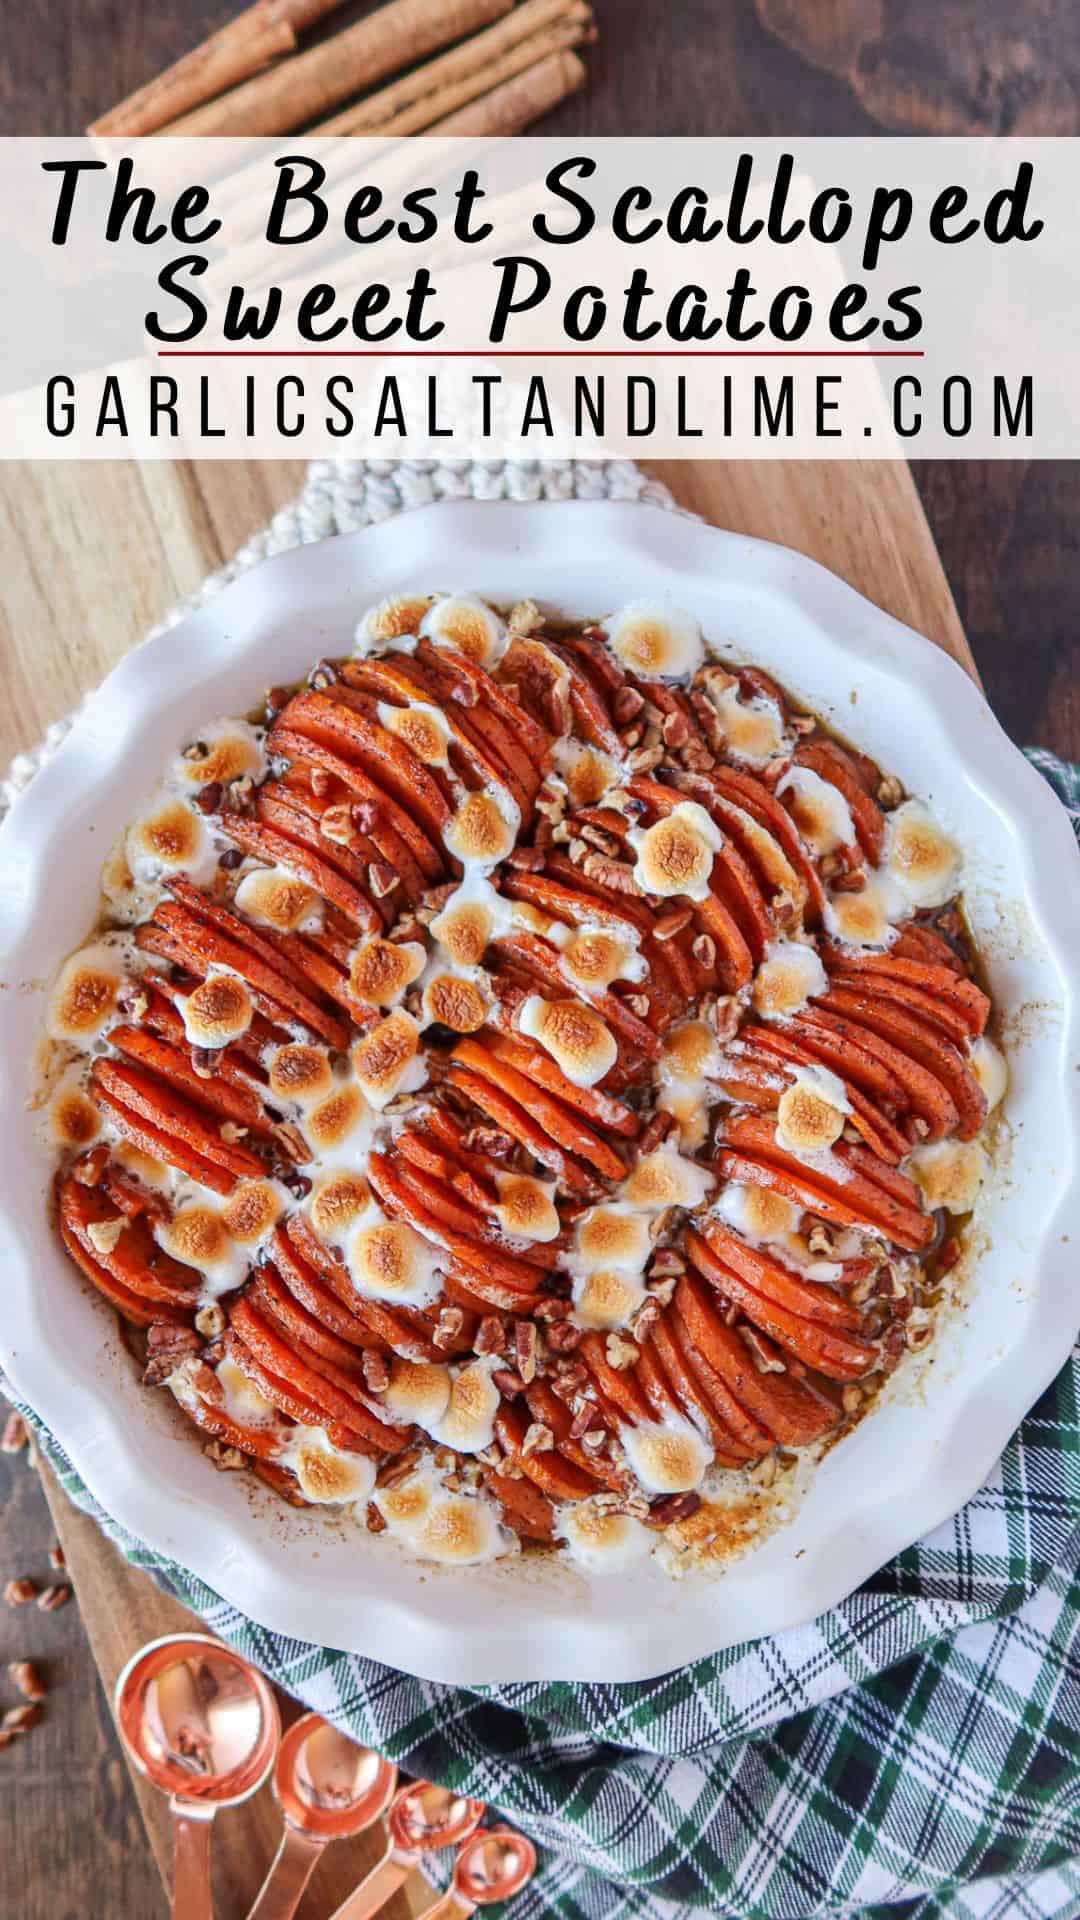 Scalloped sweet potatoes with text overlay for Pinterest.